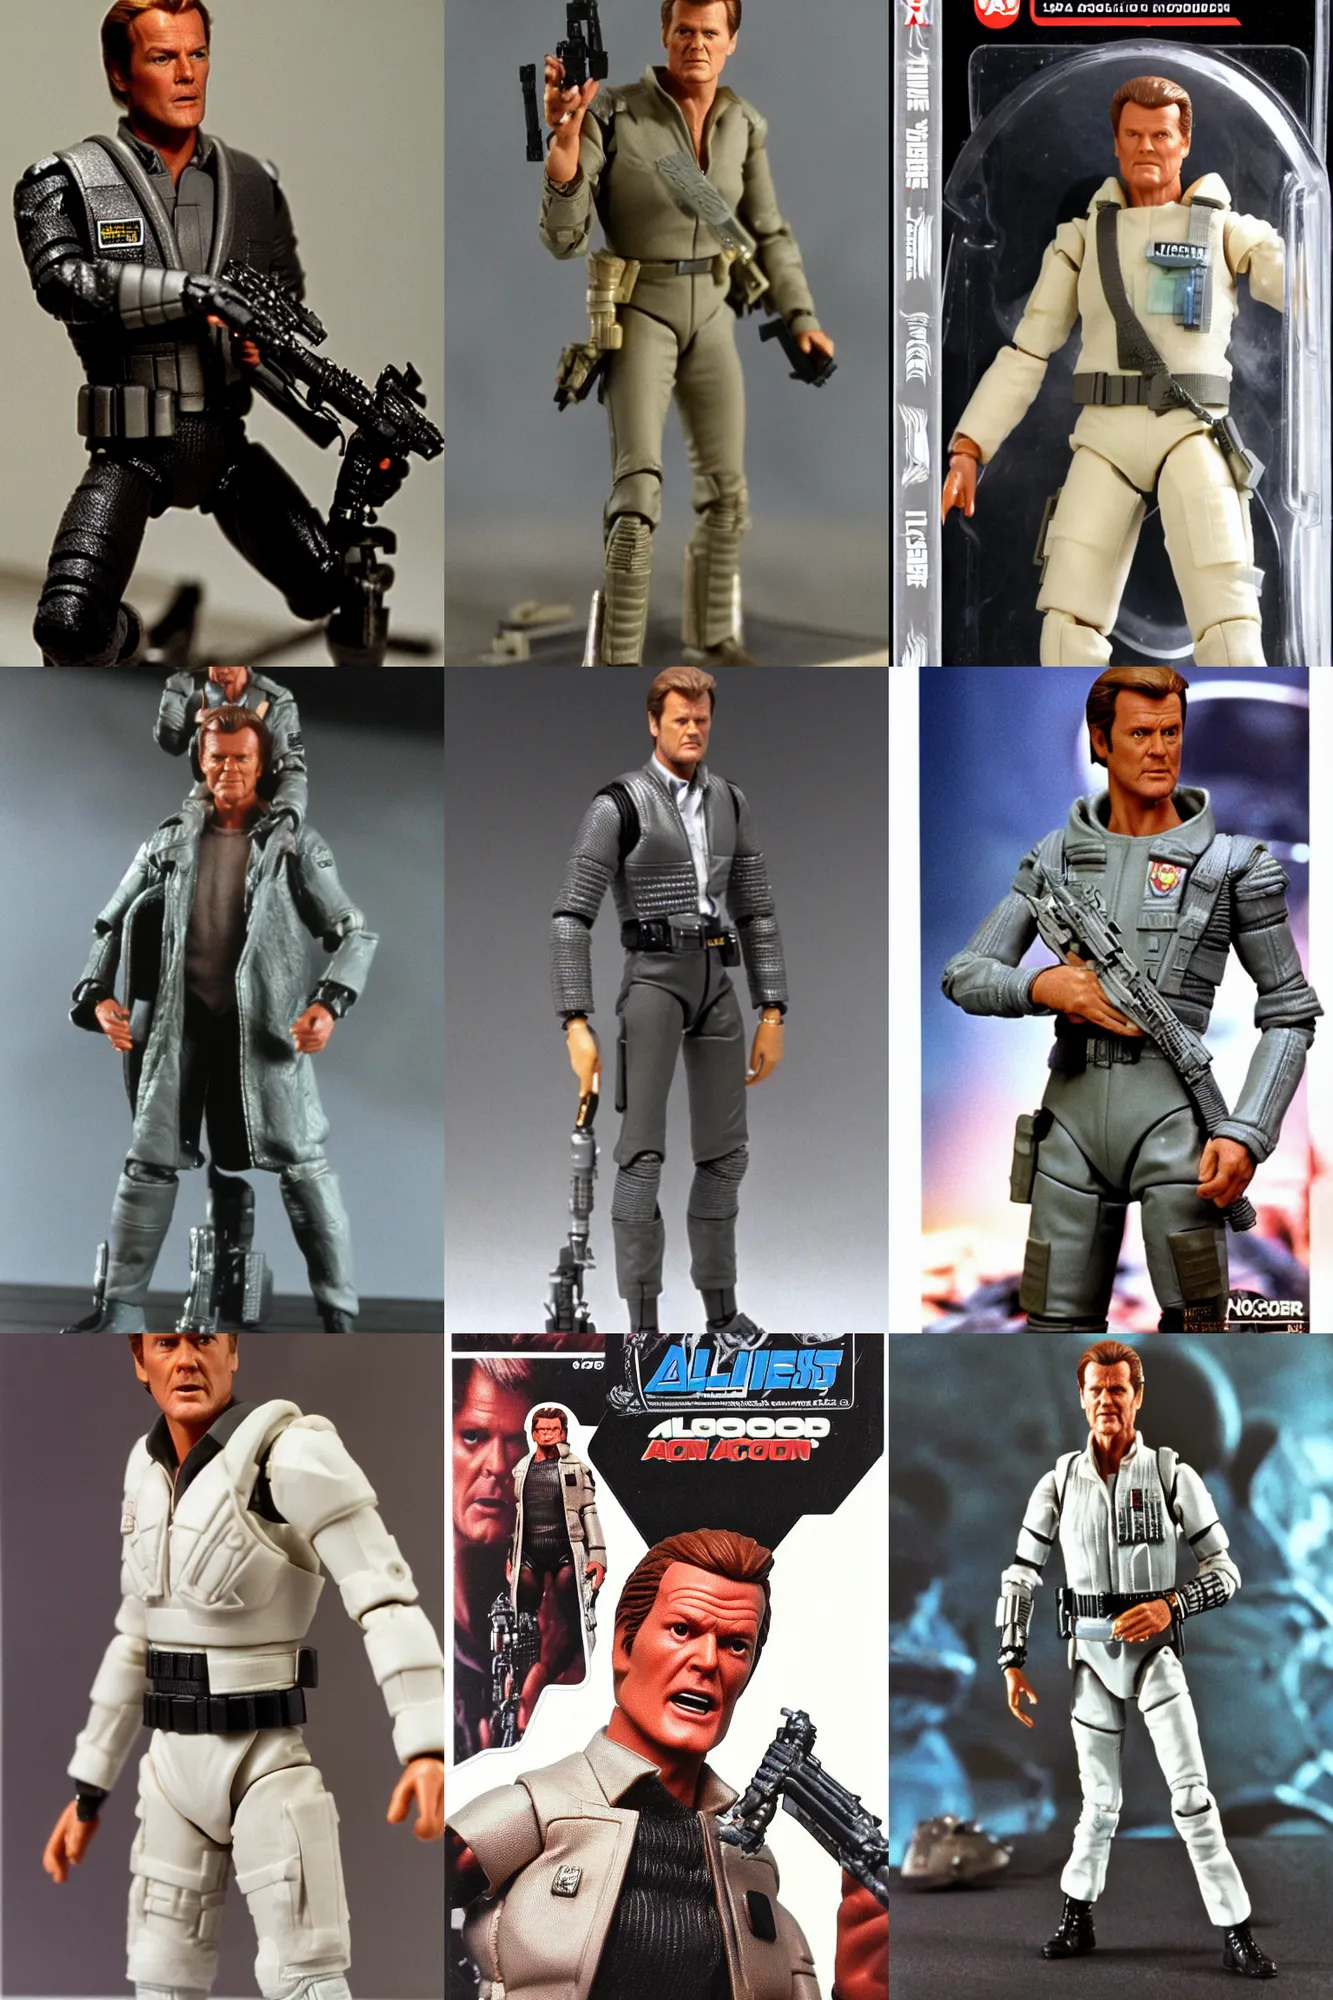 Prompt: roger moore, aliens 1 9 8 6 film, action figure by kenner toys